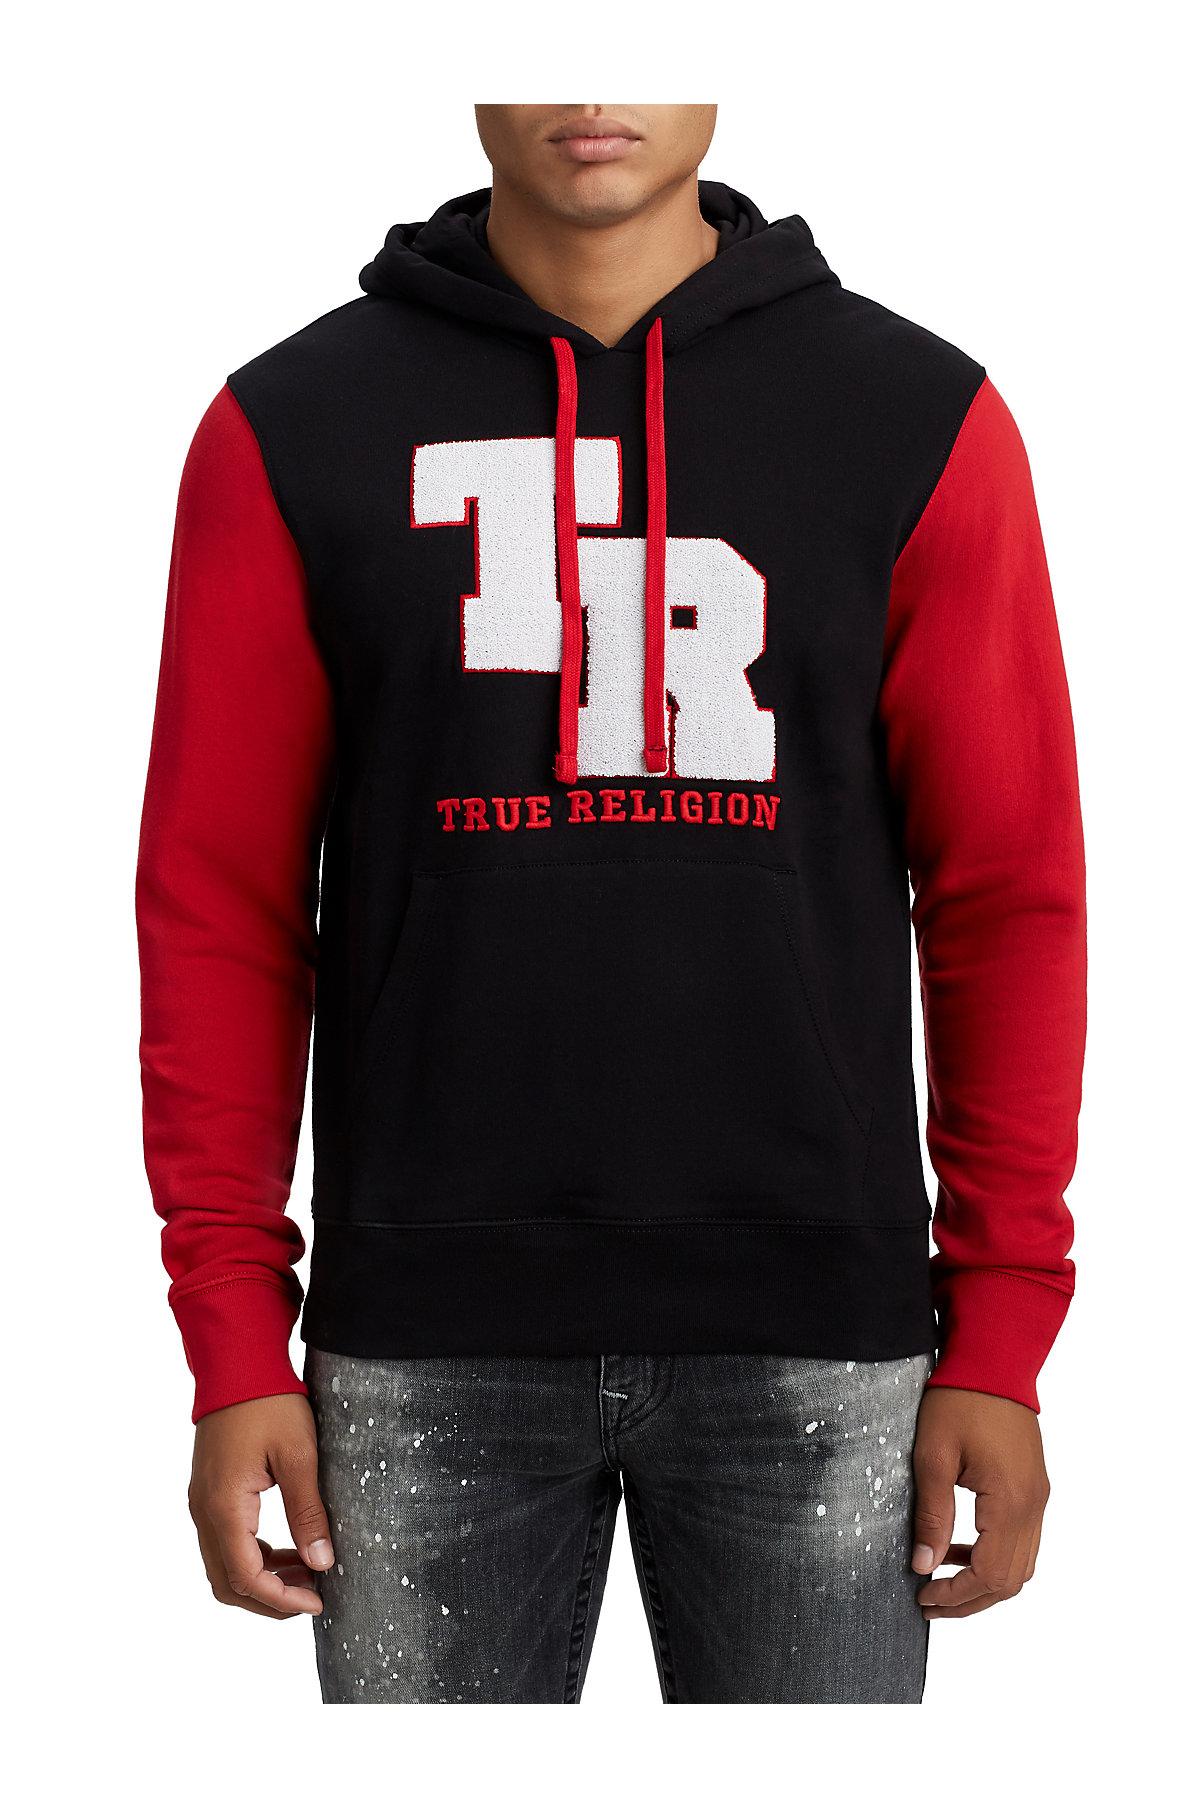 black and red true religion sweat suit